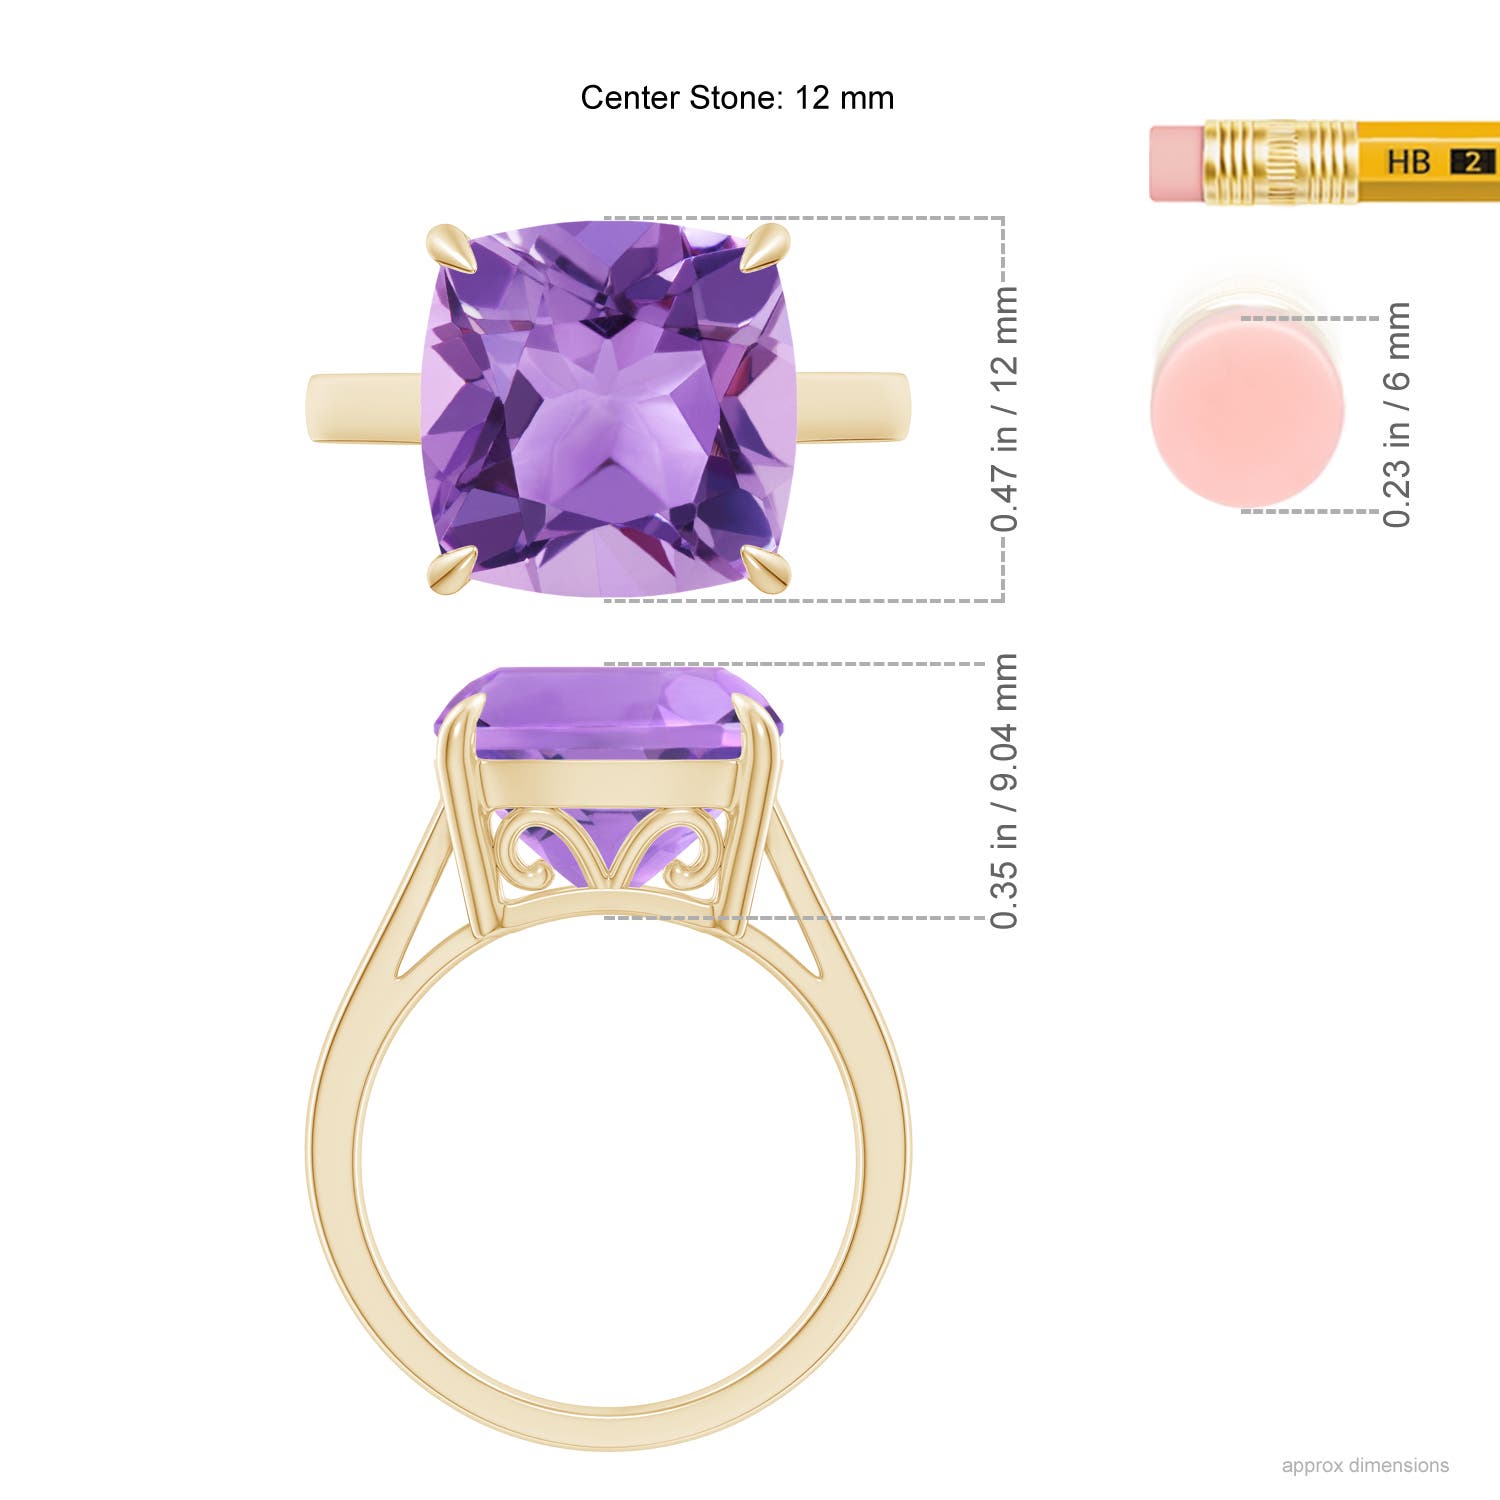 A - Amethyst / 6.15 CT / 14 KT Yellow Gold